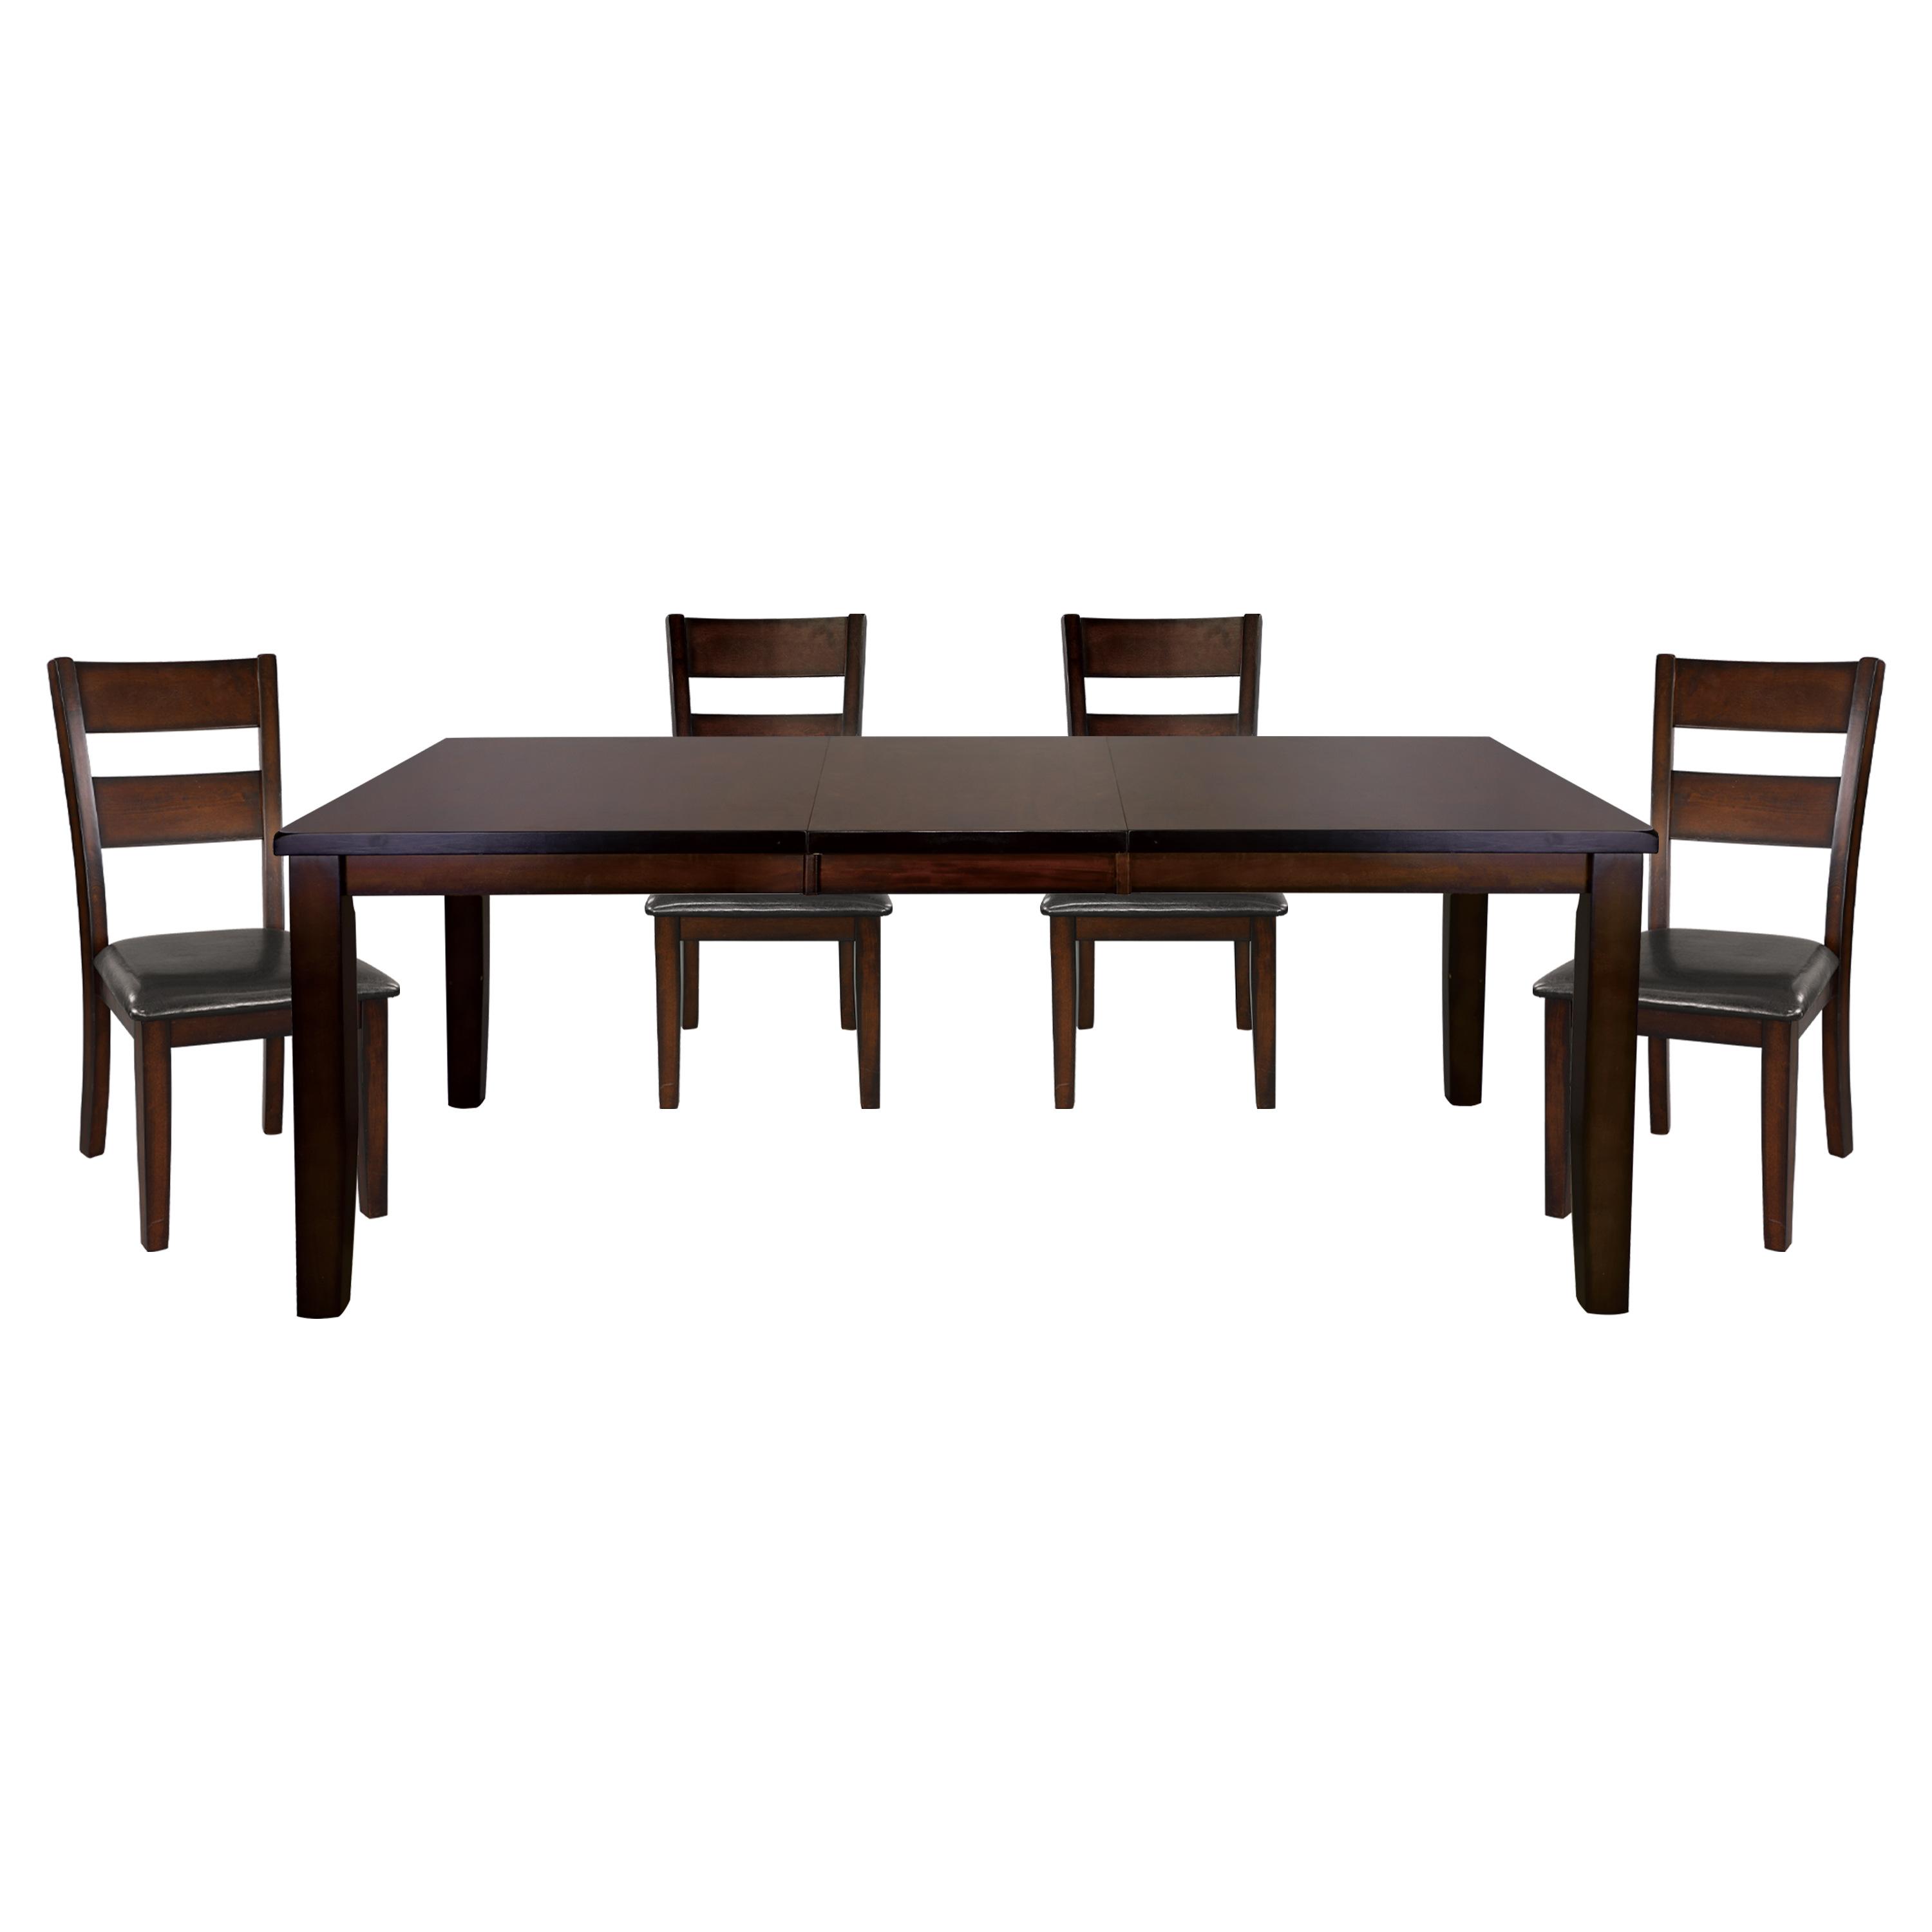 Transitional Dining Room Set 5547-78*5 Mantello 5547-78*5 in Cherry Faux Leather